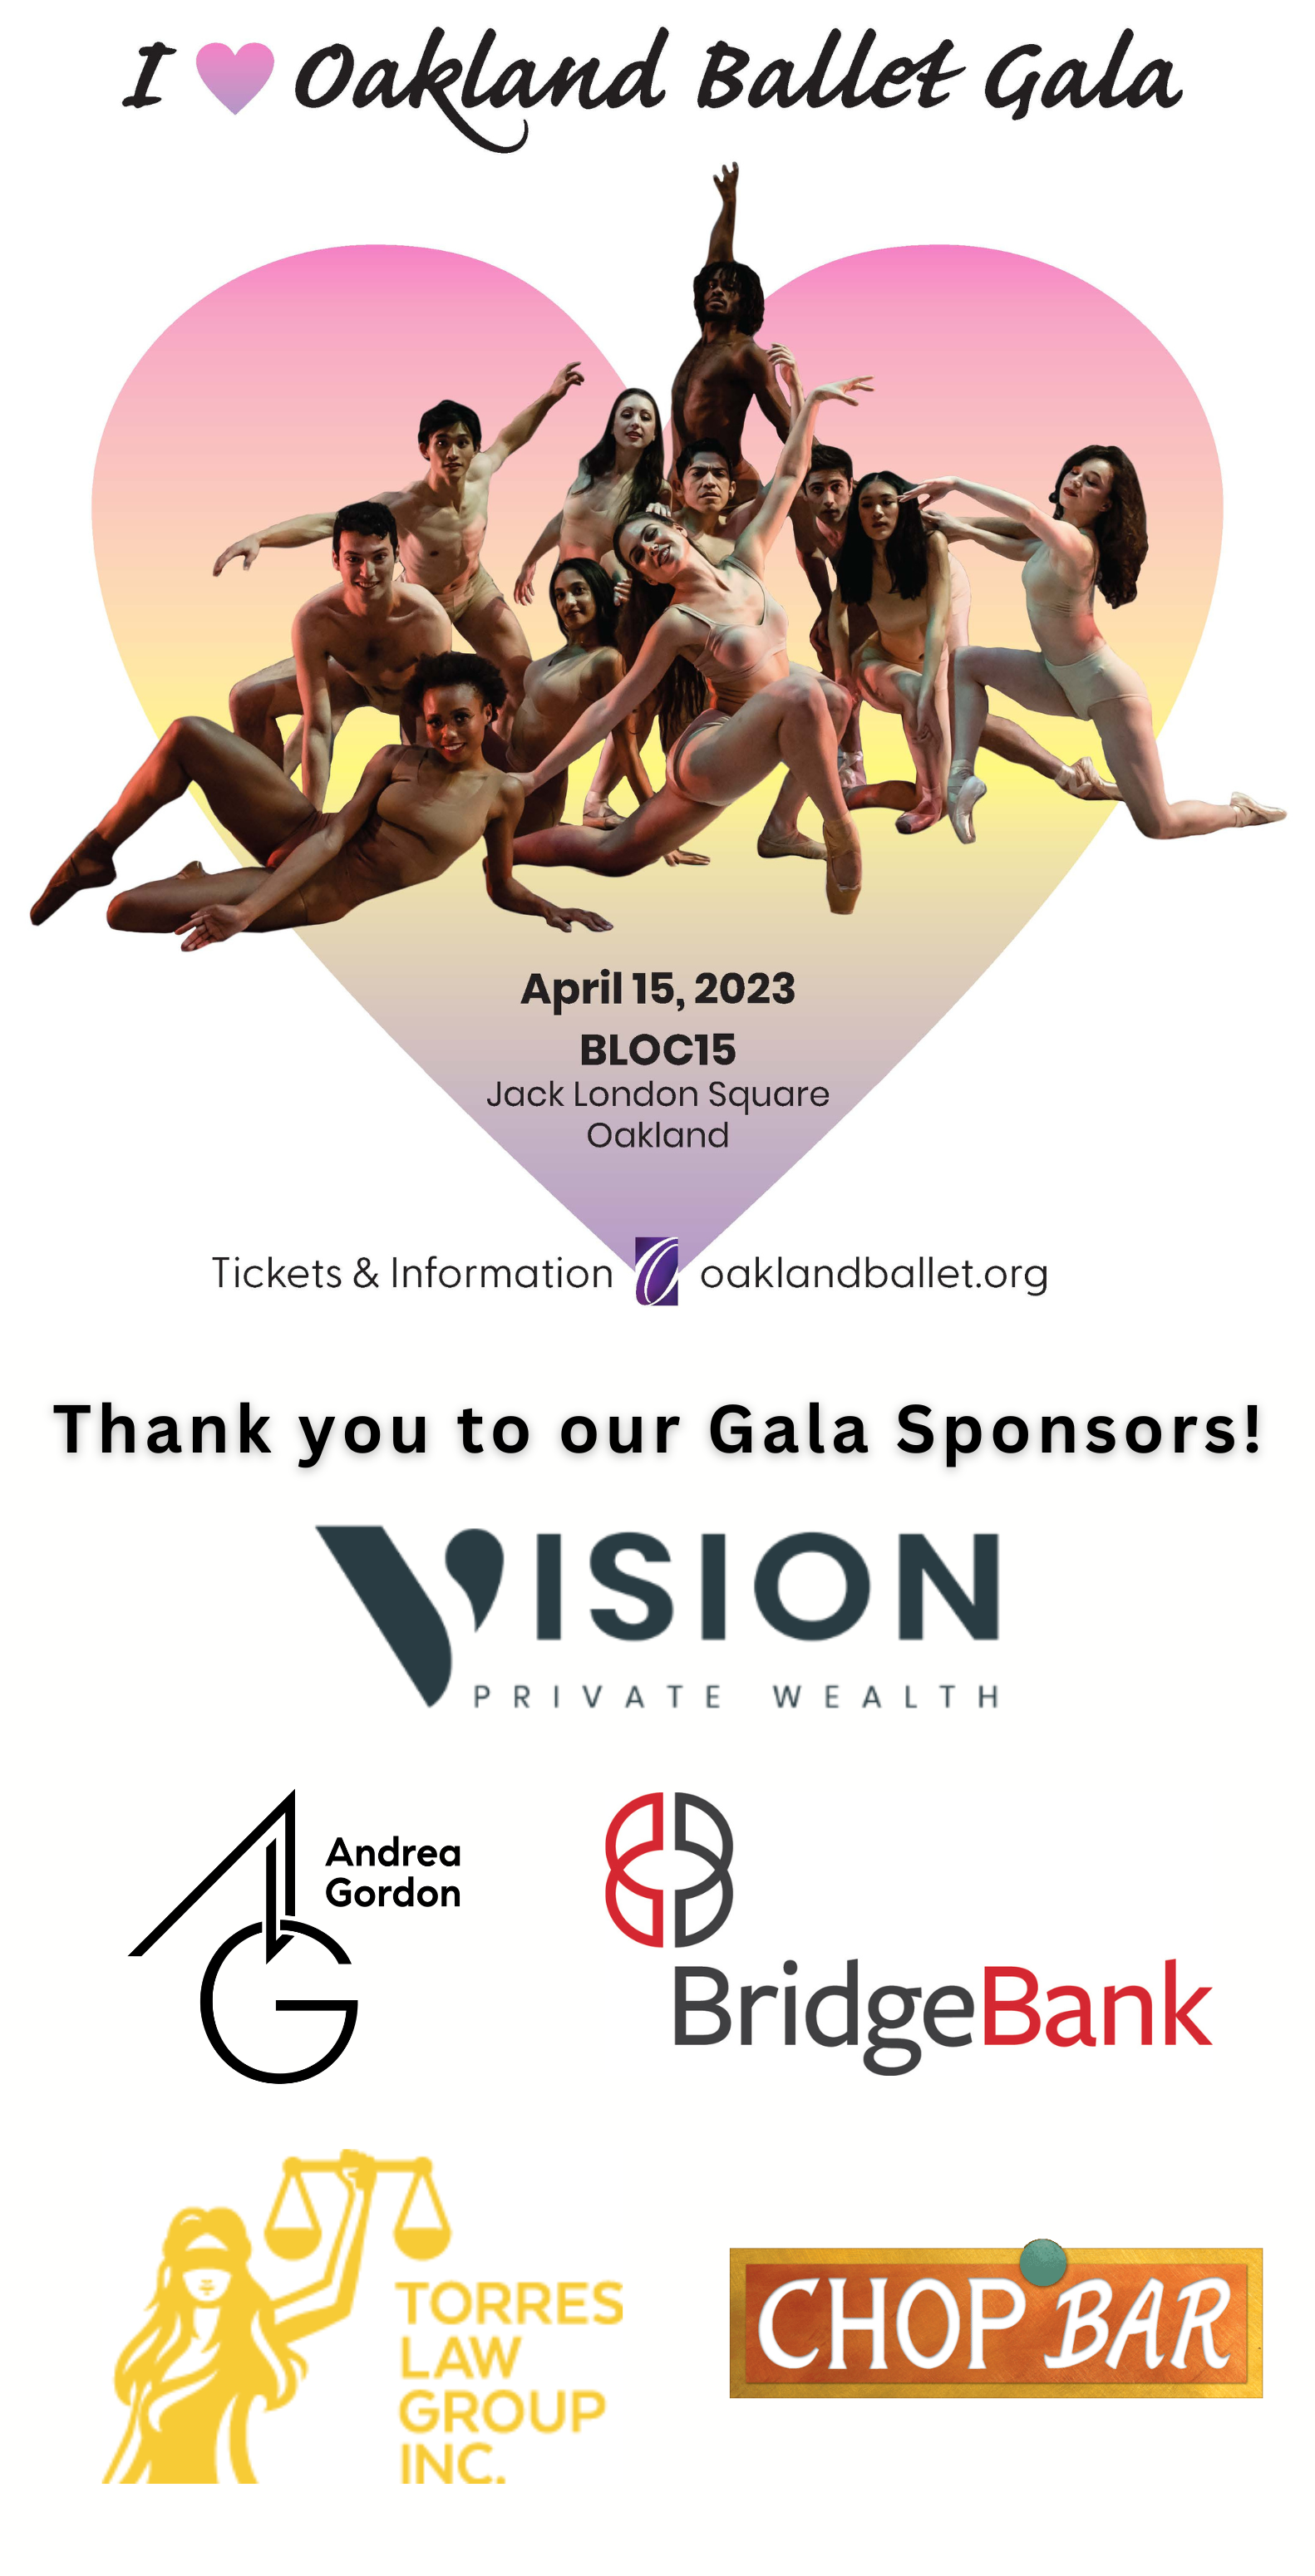 Image shows six dancers posed in front of a rainbow heart. Text reads: I Love Oakland Ballet Gala, April 15 at Bloc 15 Oakland. Thank you to our Gala Sponsors: Vision Financial Planning, Andrea Gordon Real Estate, Bridge Bank, Torres Law Group